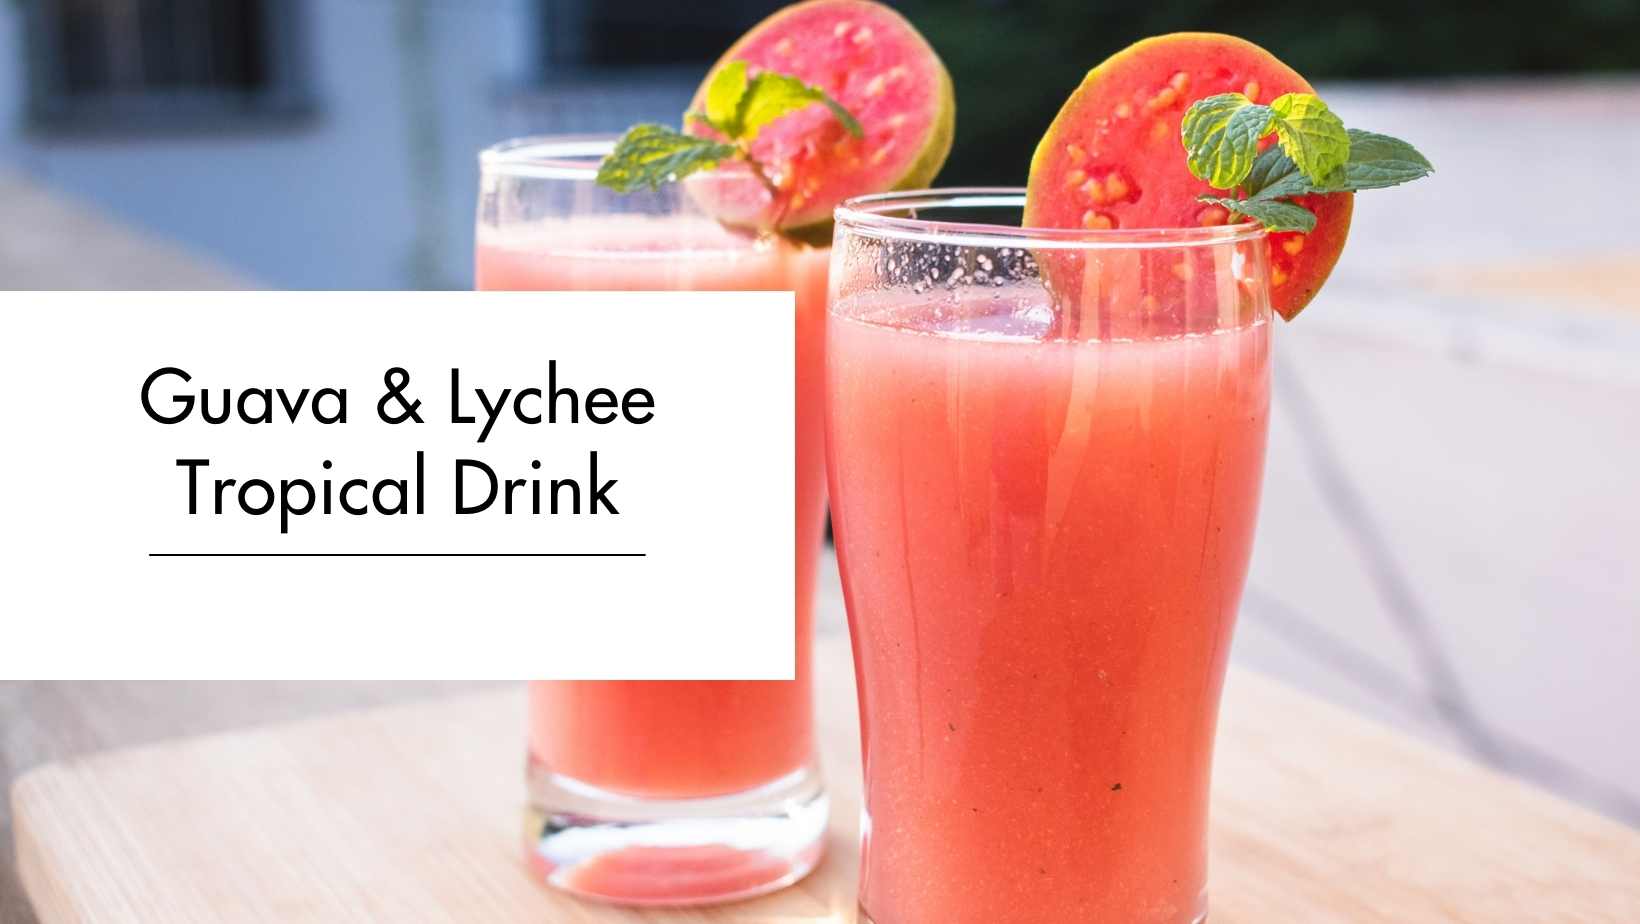 Guava & Lychee Tropical Drink